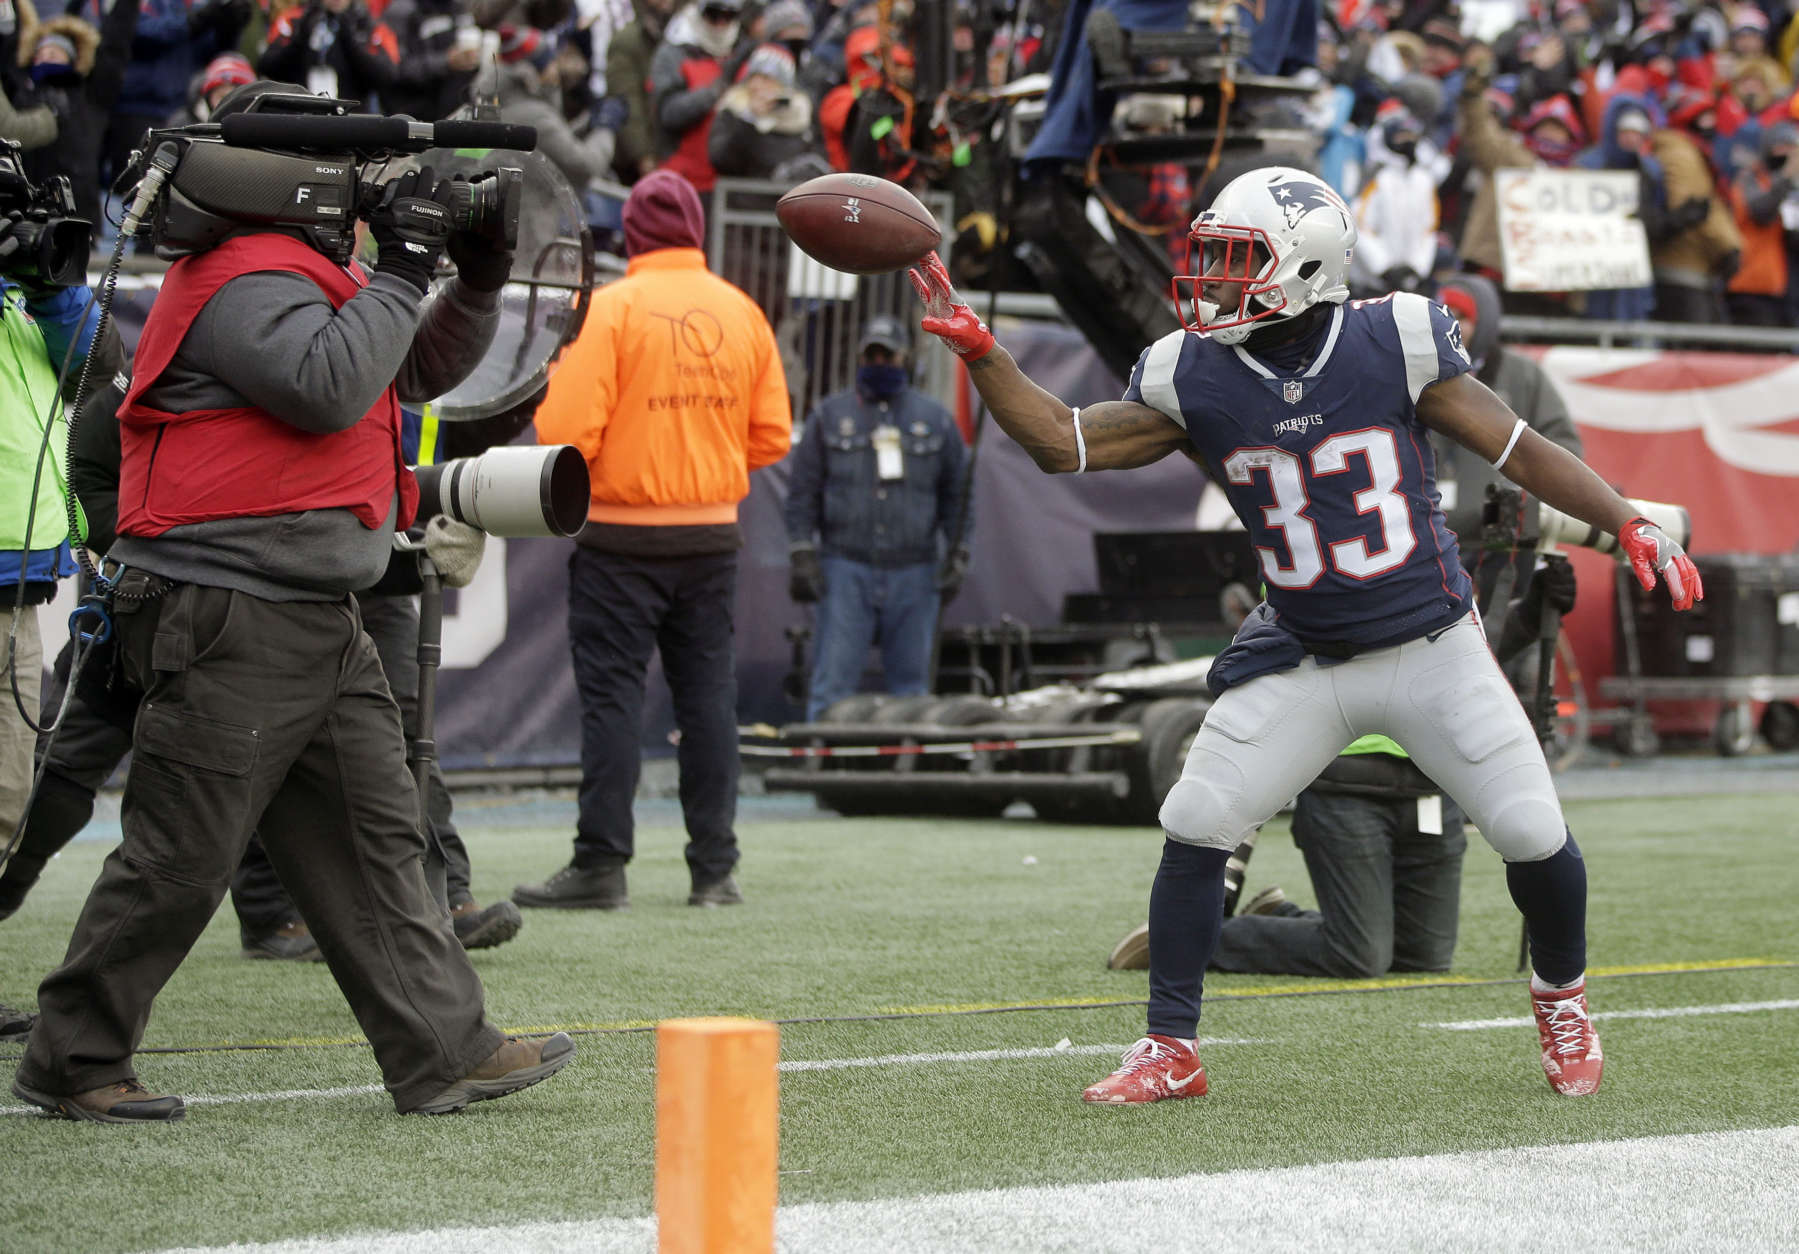 New England Patriots running back Dion Lewis (33) tosses the football at a network sideline camera after scoring a touchdown against the New York Jets during the first half of an NFL football game, Sunday, Dec. 31, 2017, in Foxborough, Mass. (AP Photo/Steven Senne)